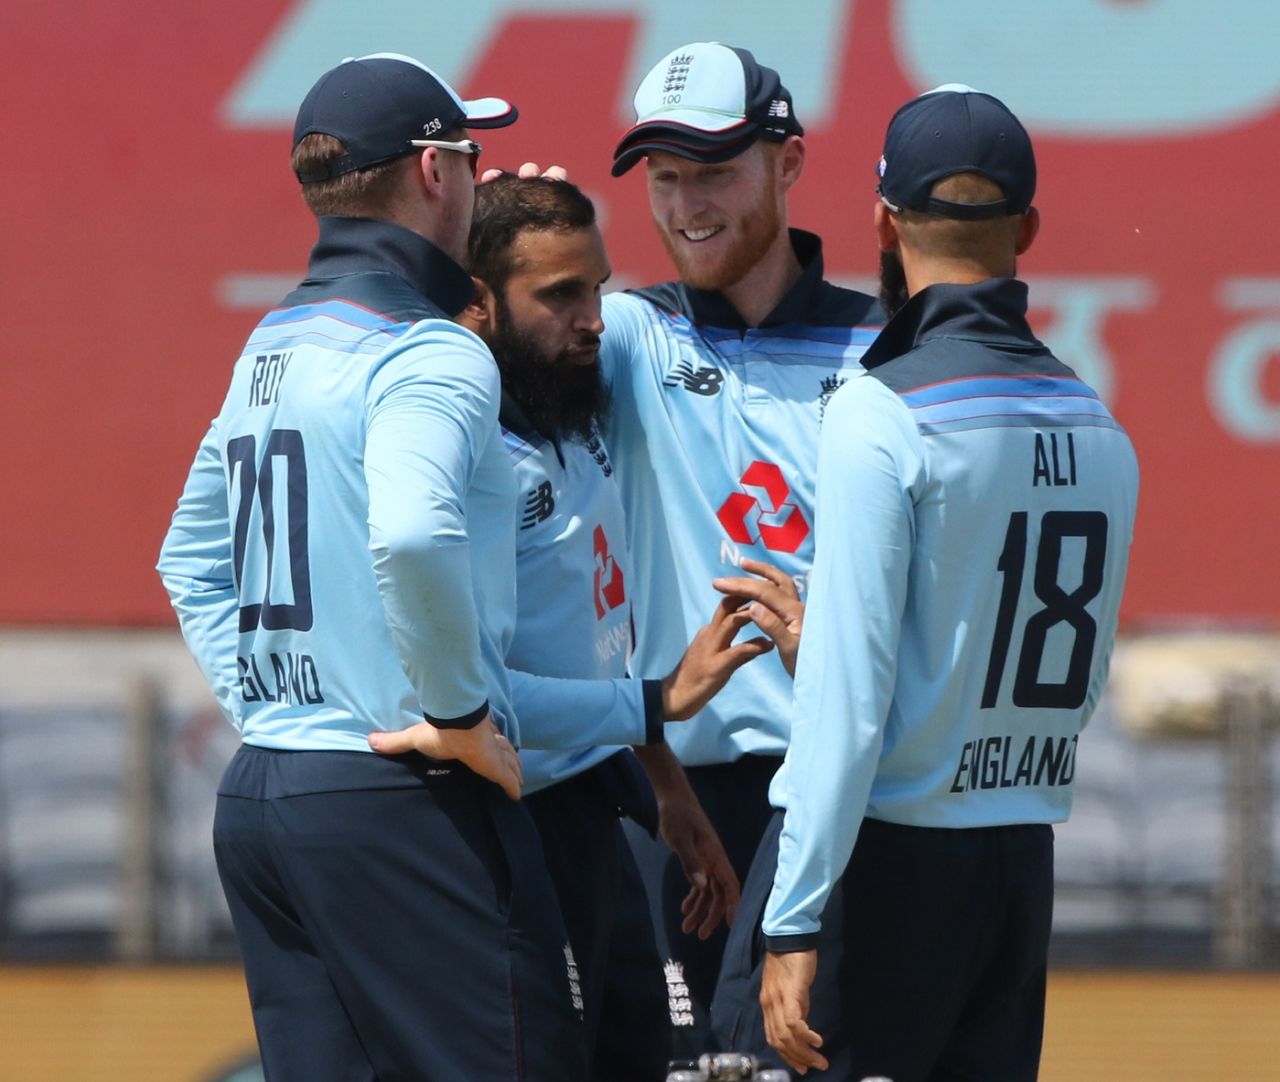 Adil Rashid is congratulated after picking up a wicket, India vs England, 3rd ODI, Pune, March 28, 2021